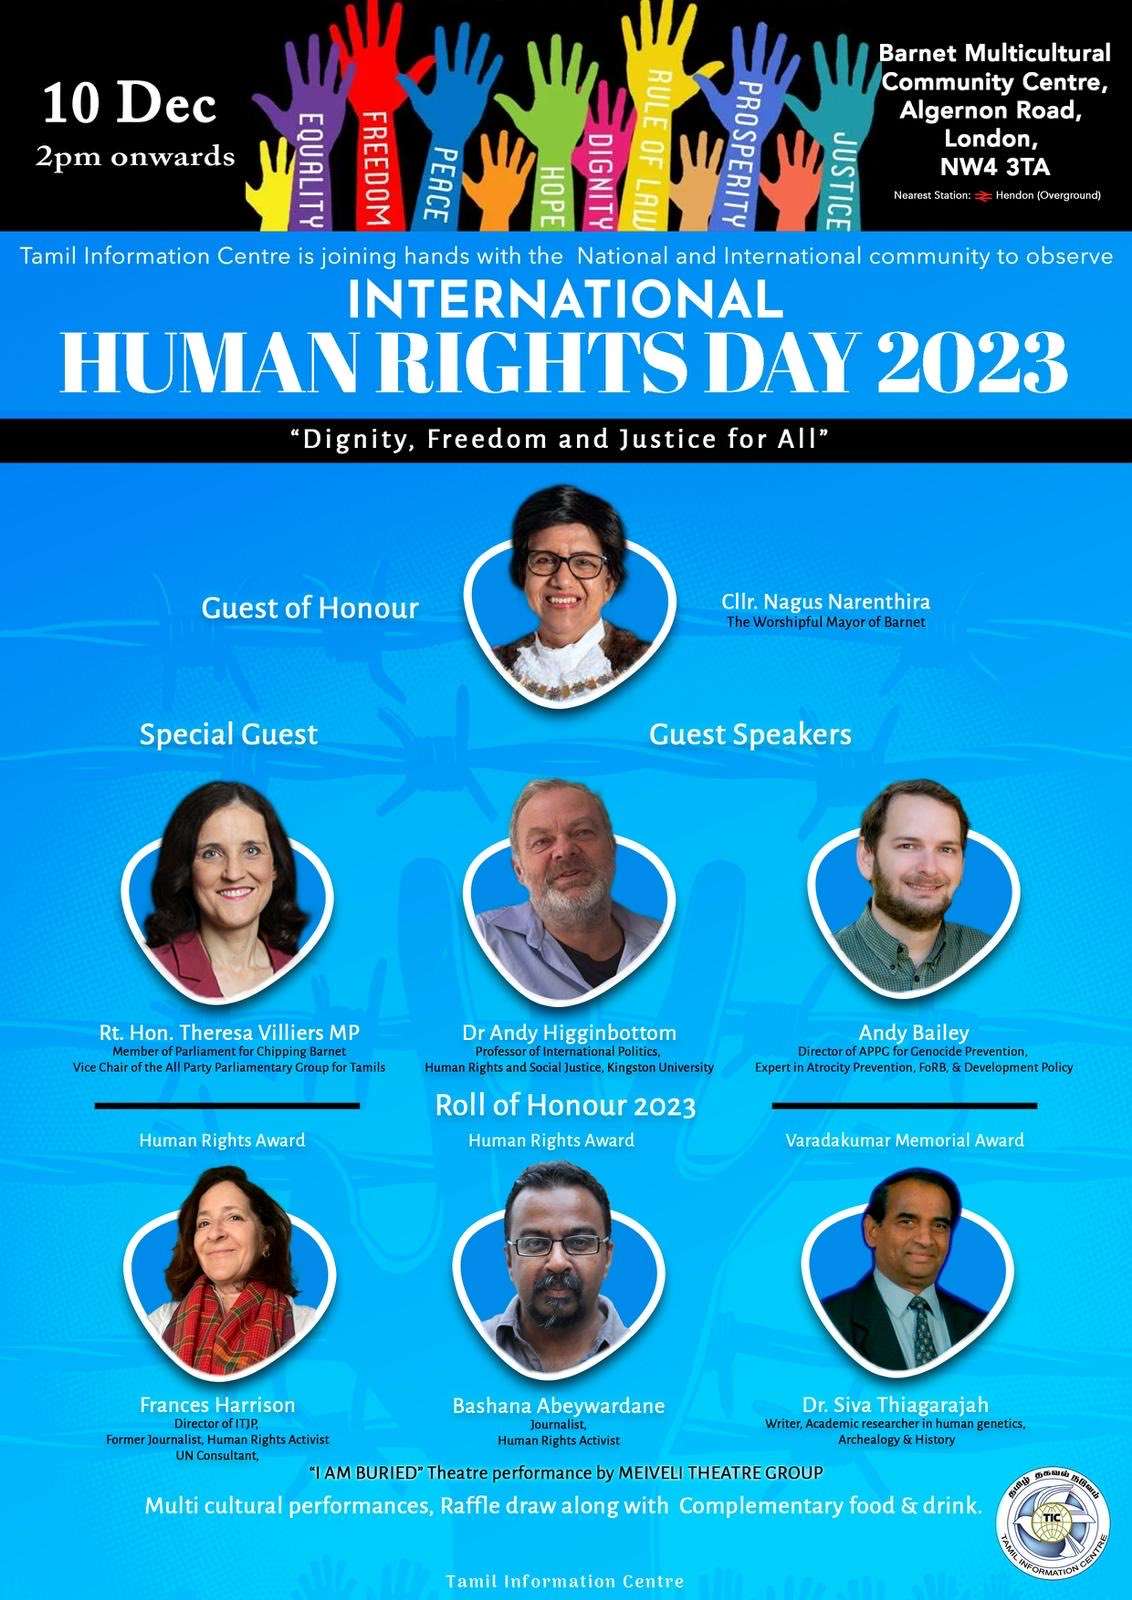 Tamil Information Center (TIC) Shines a Spotlight on Human Rights Advocacy in London: Celebrating World Human Rights Day 2023